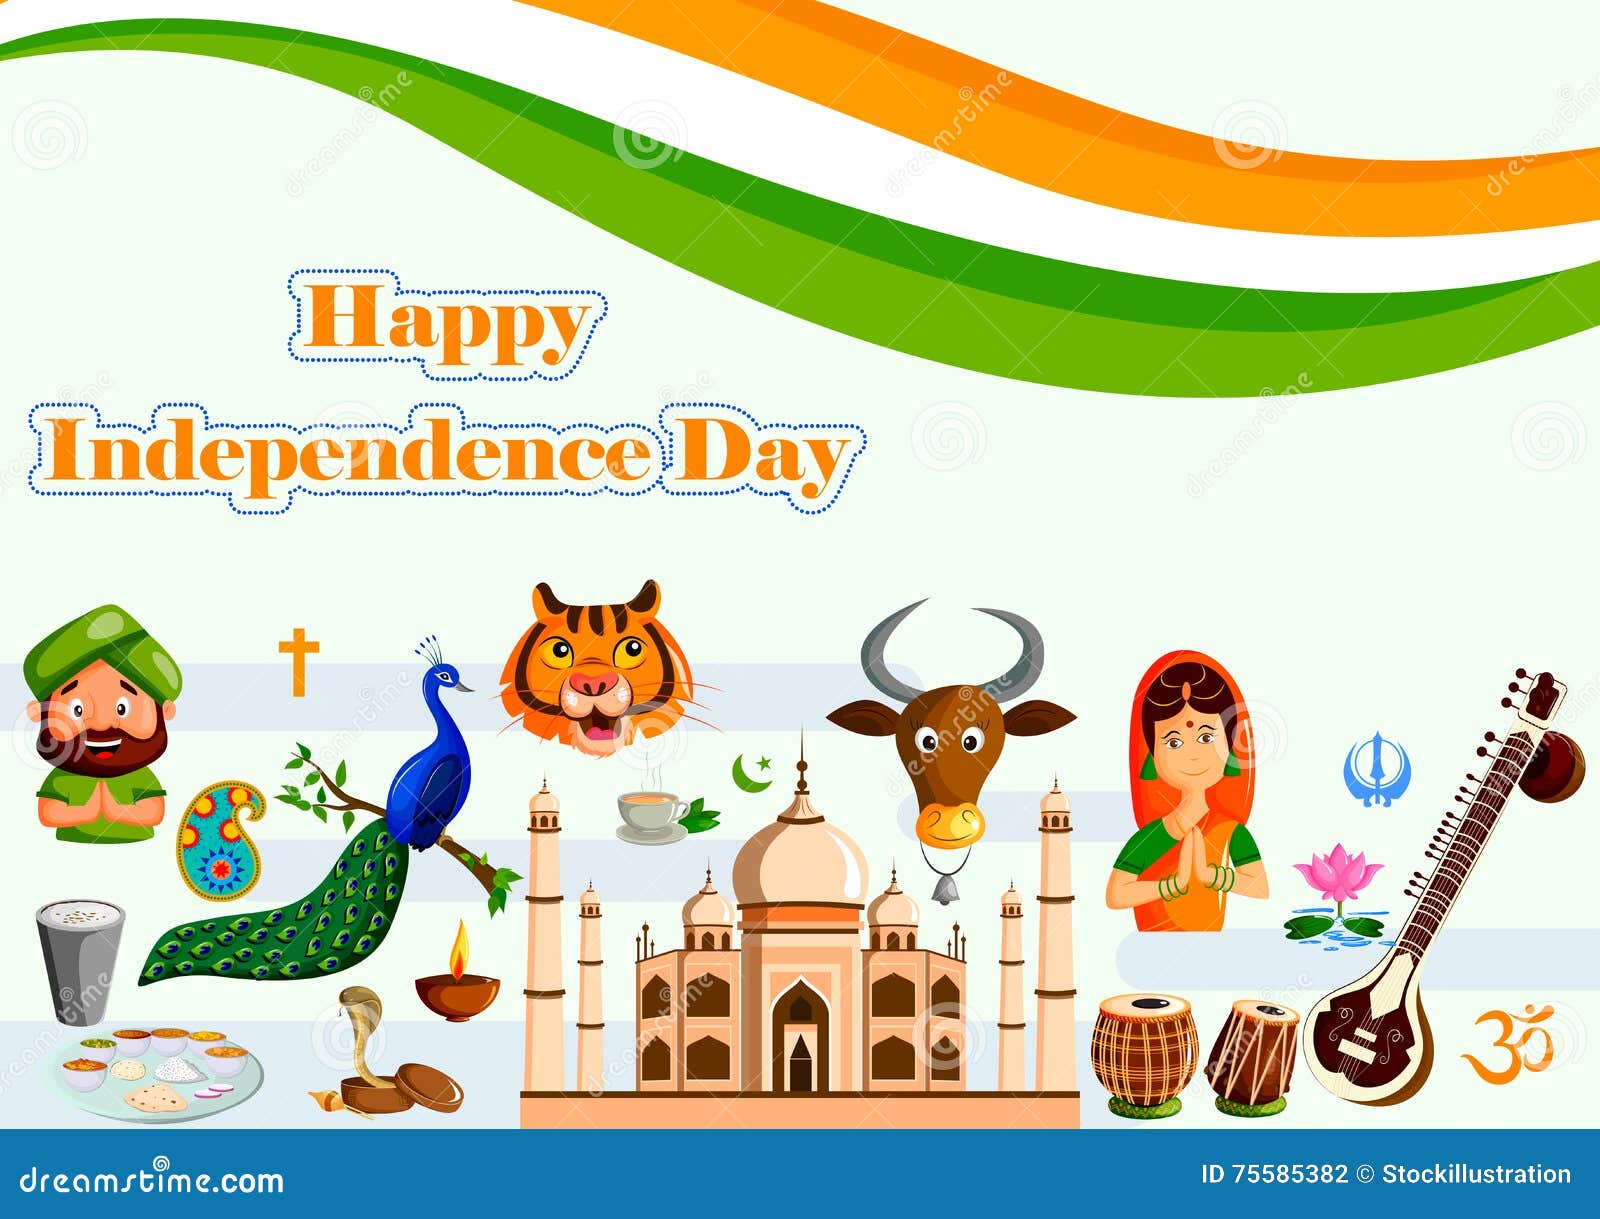 Happy Independence Day of India Stock Vector - Illustration of nation ...